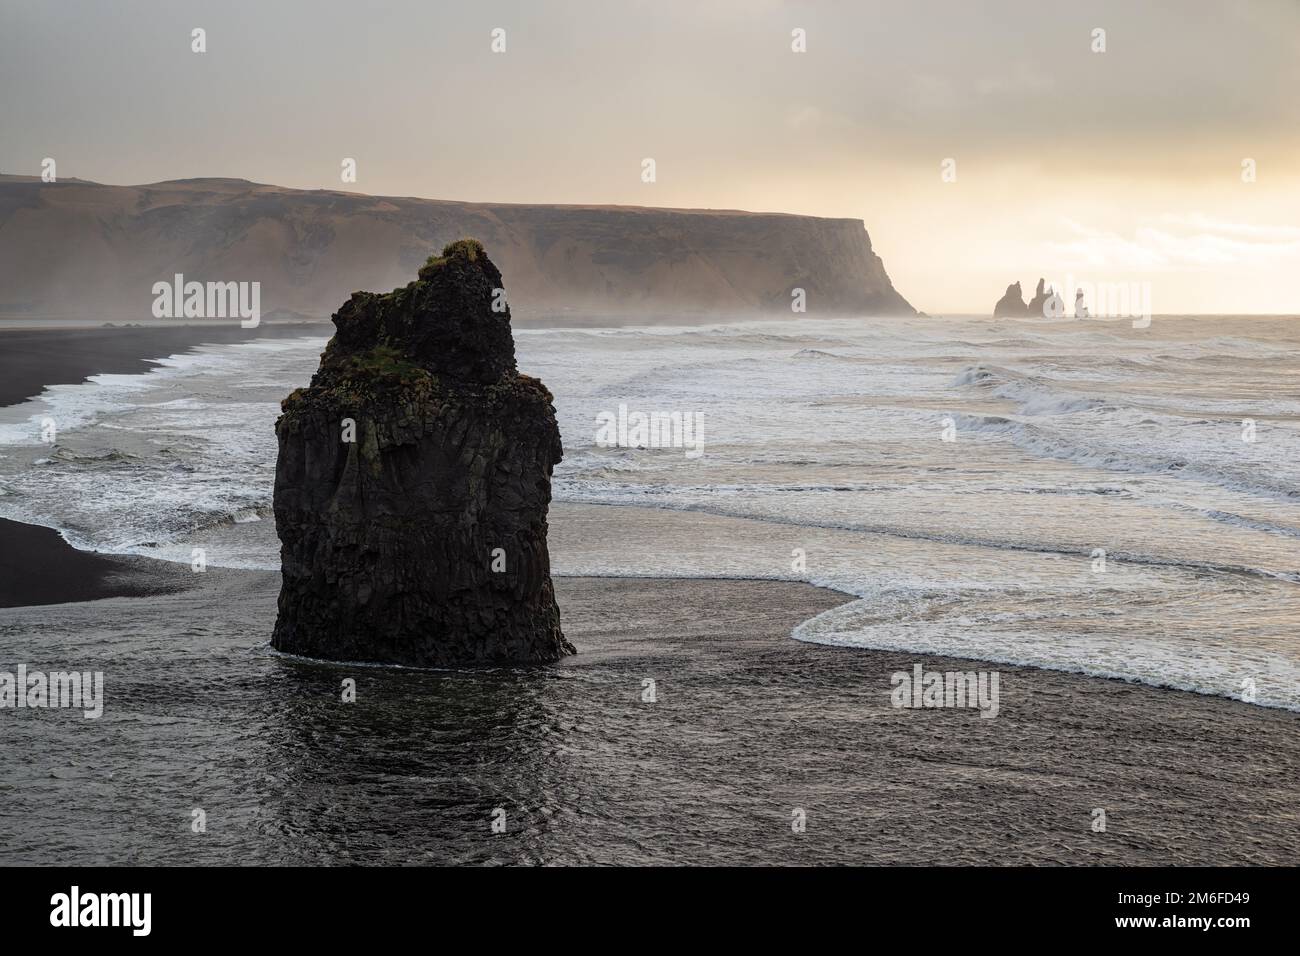 Rock formation at Dyrholaey at sunset, Iceland Stock Photo